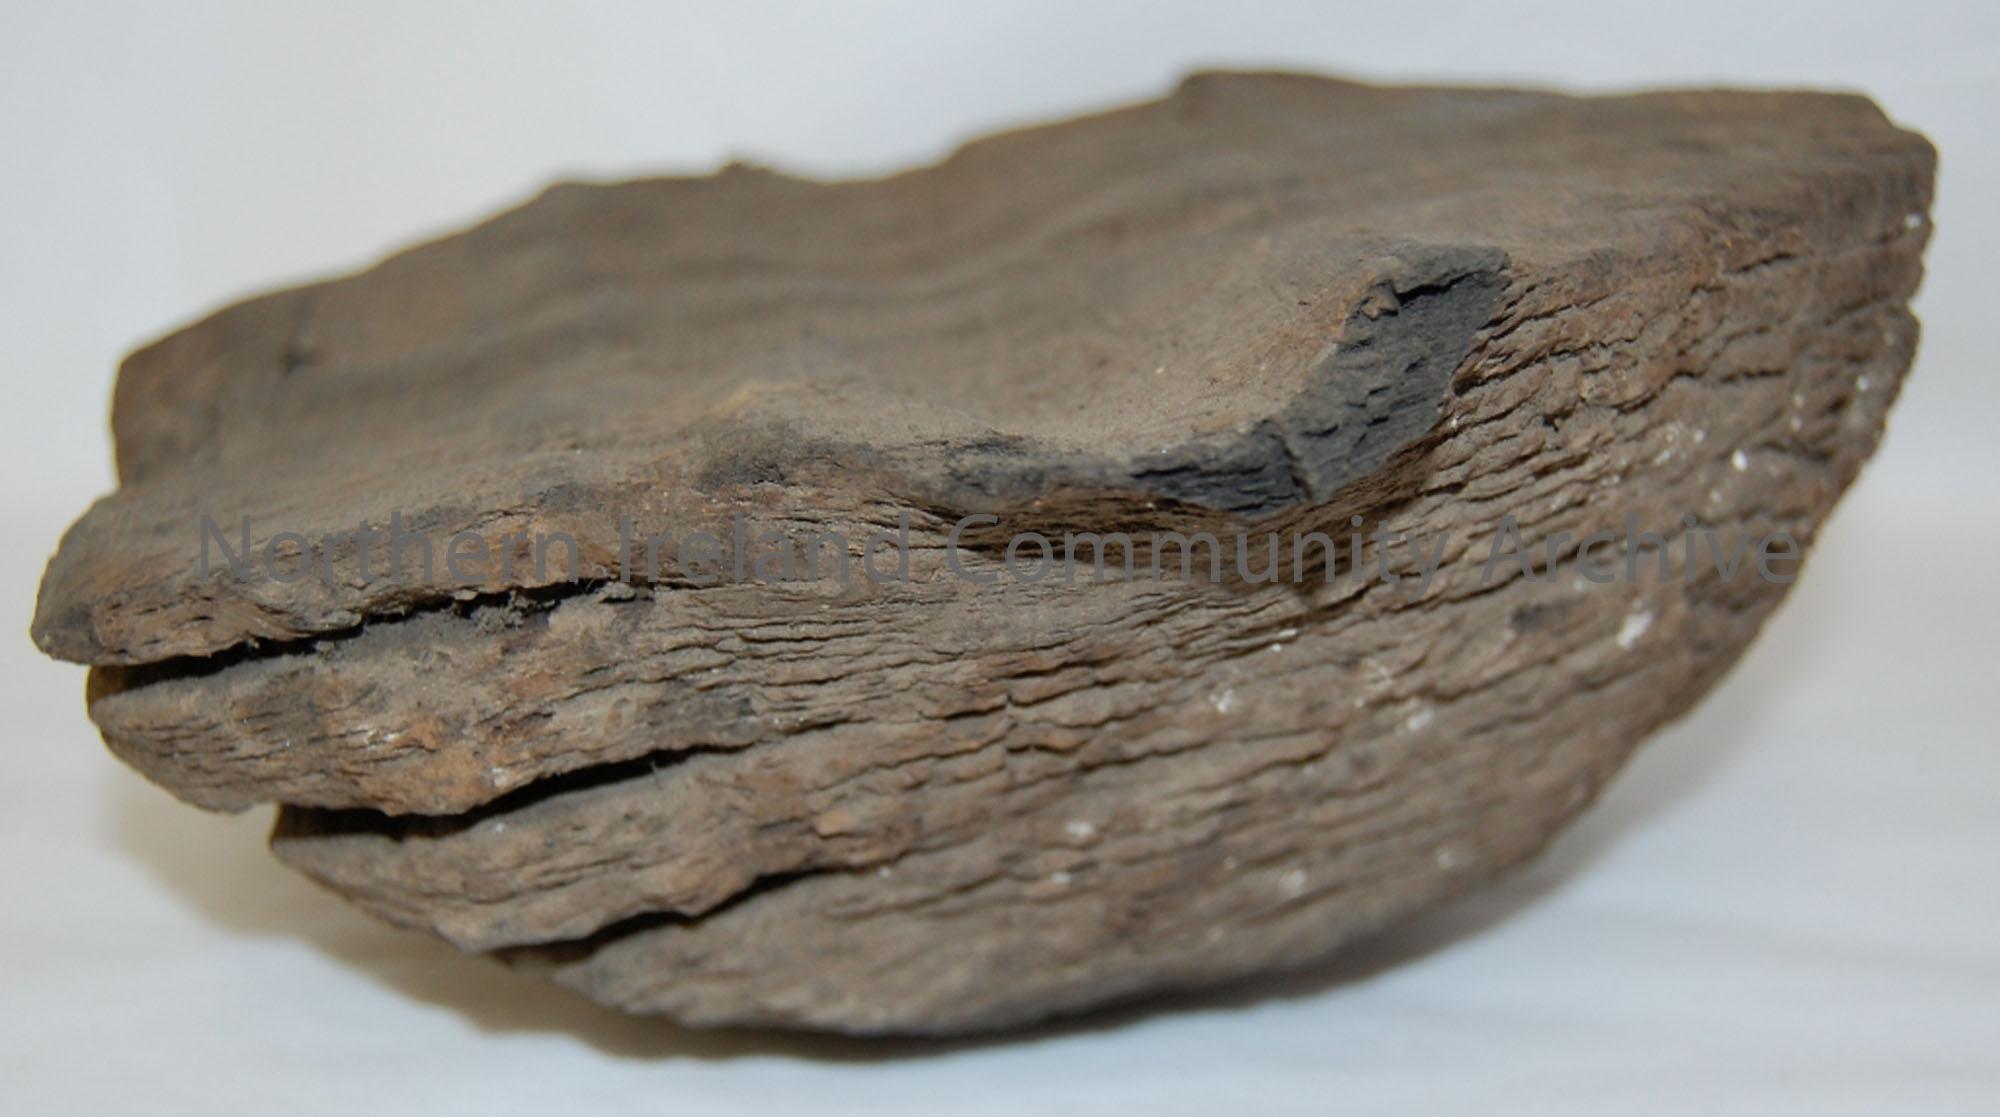 Dome shaped piece of wood with flat base and concentric grooves evident.